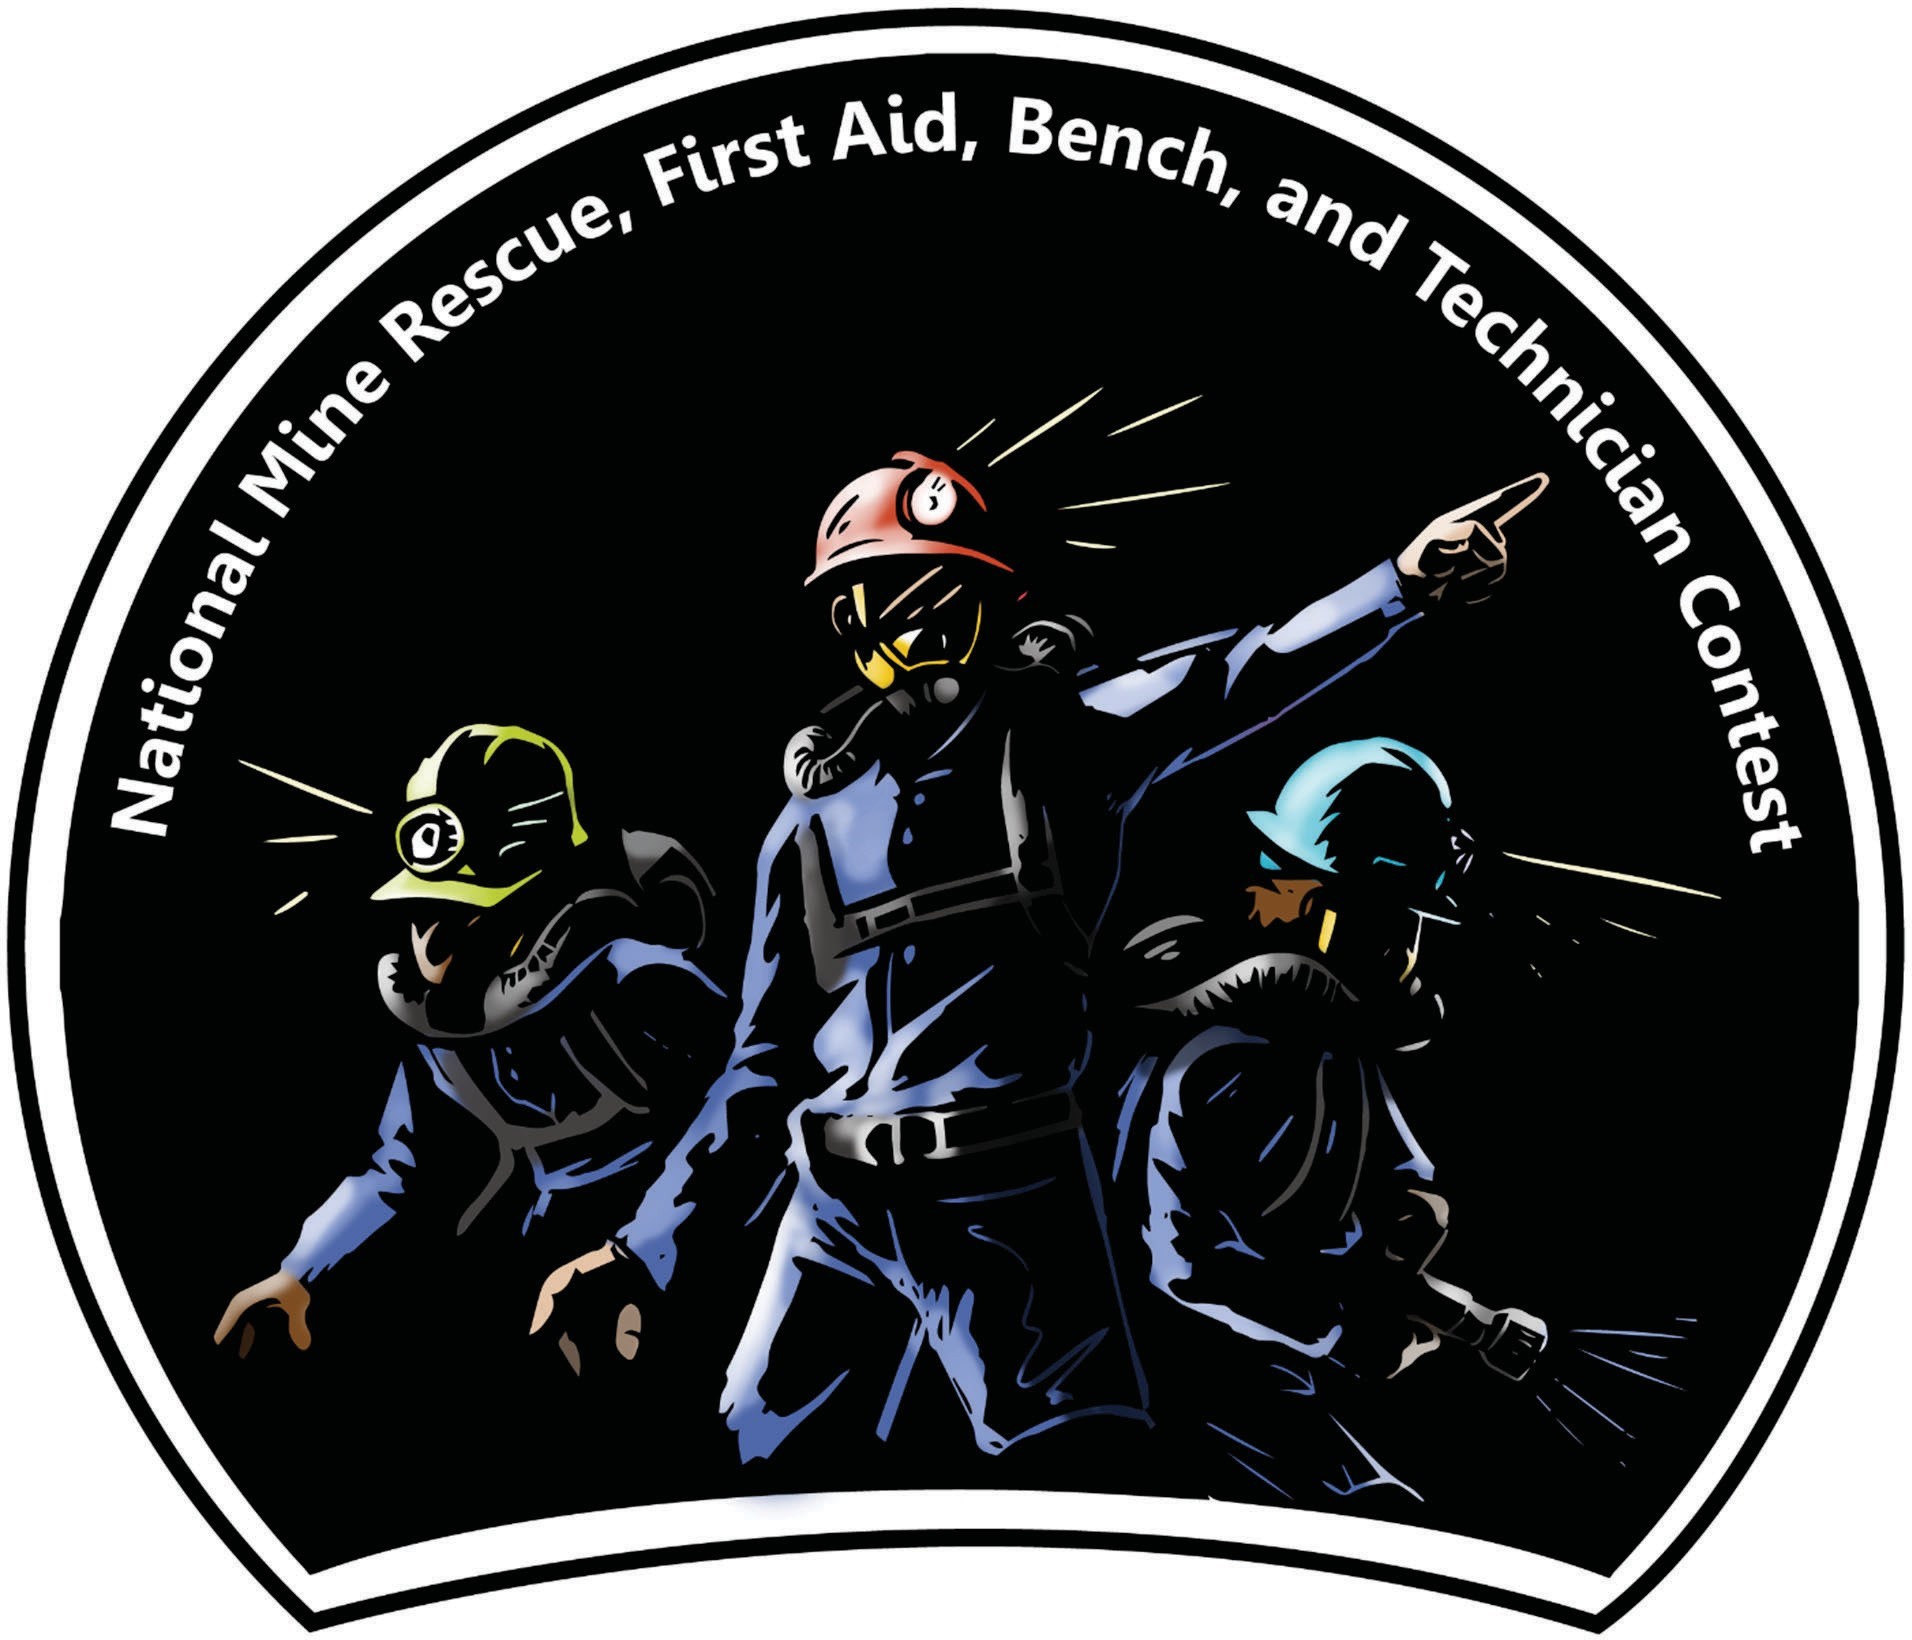 National Mine Rescue, First Aid, Bench, and Technician Contest logo